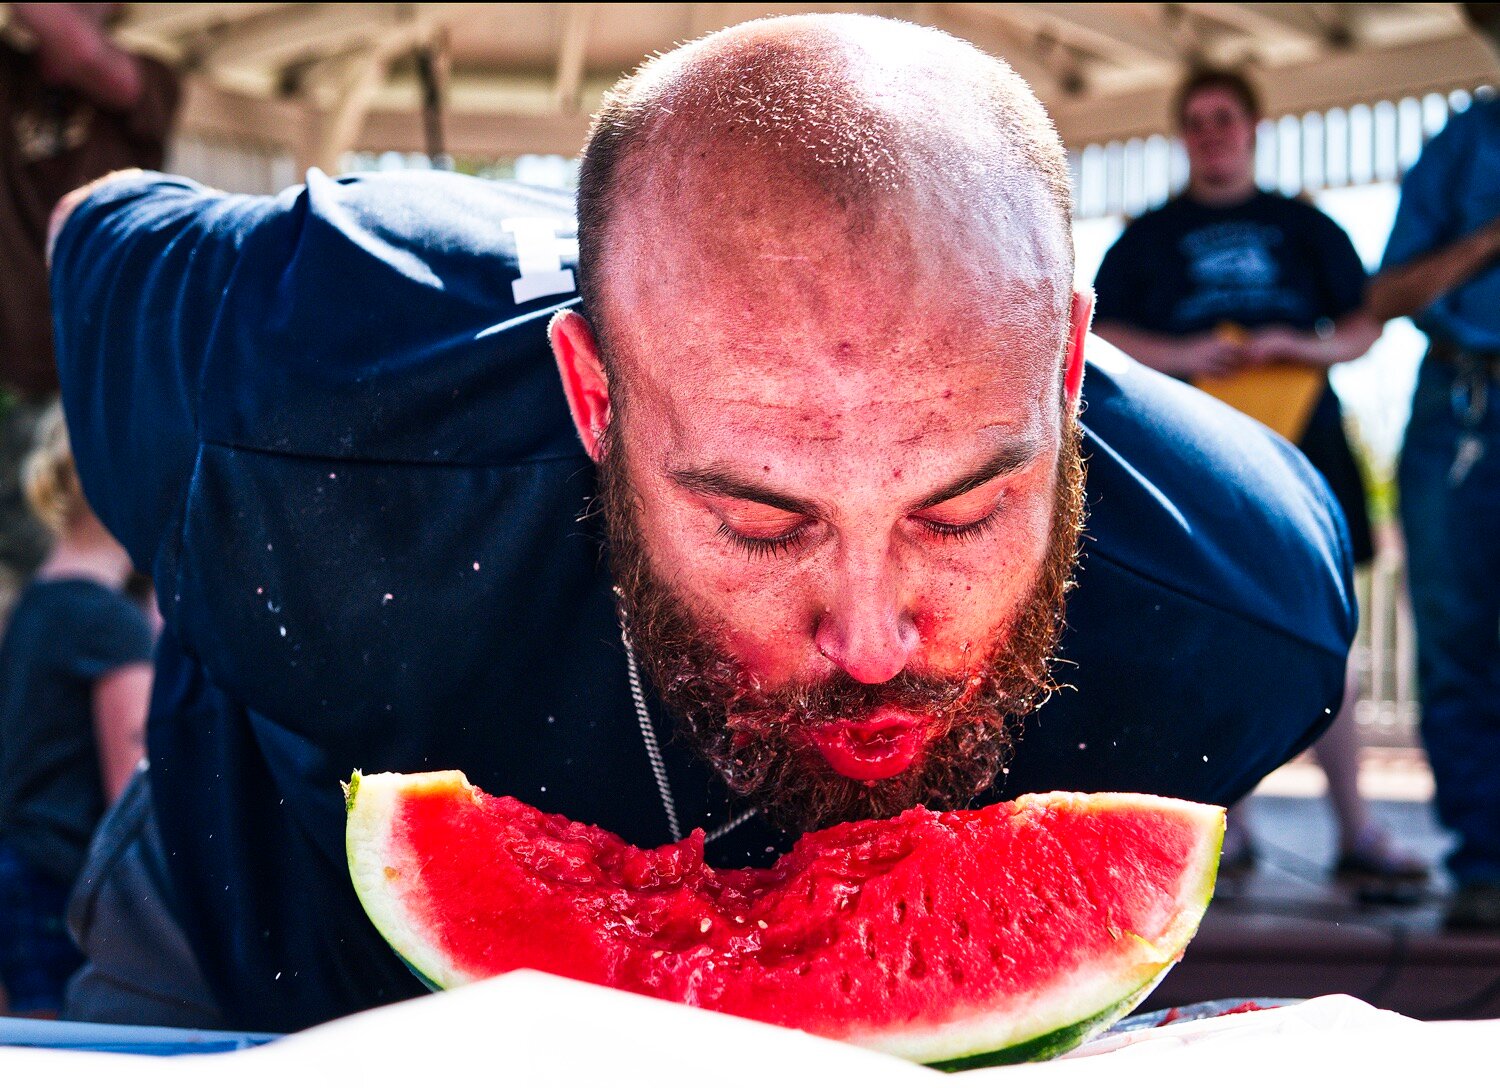 Justin Green of Point won the adult division of the watermelon-eating contest, defeating two-time-defending champ Josh Davis in a tie-breaking eat-off of a third slice of watermelon. [additional iron horse images available]